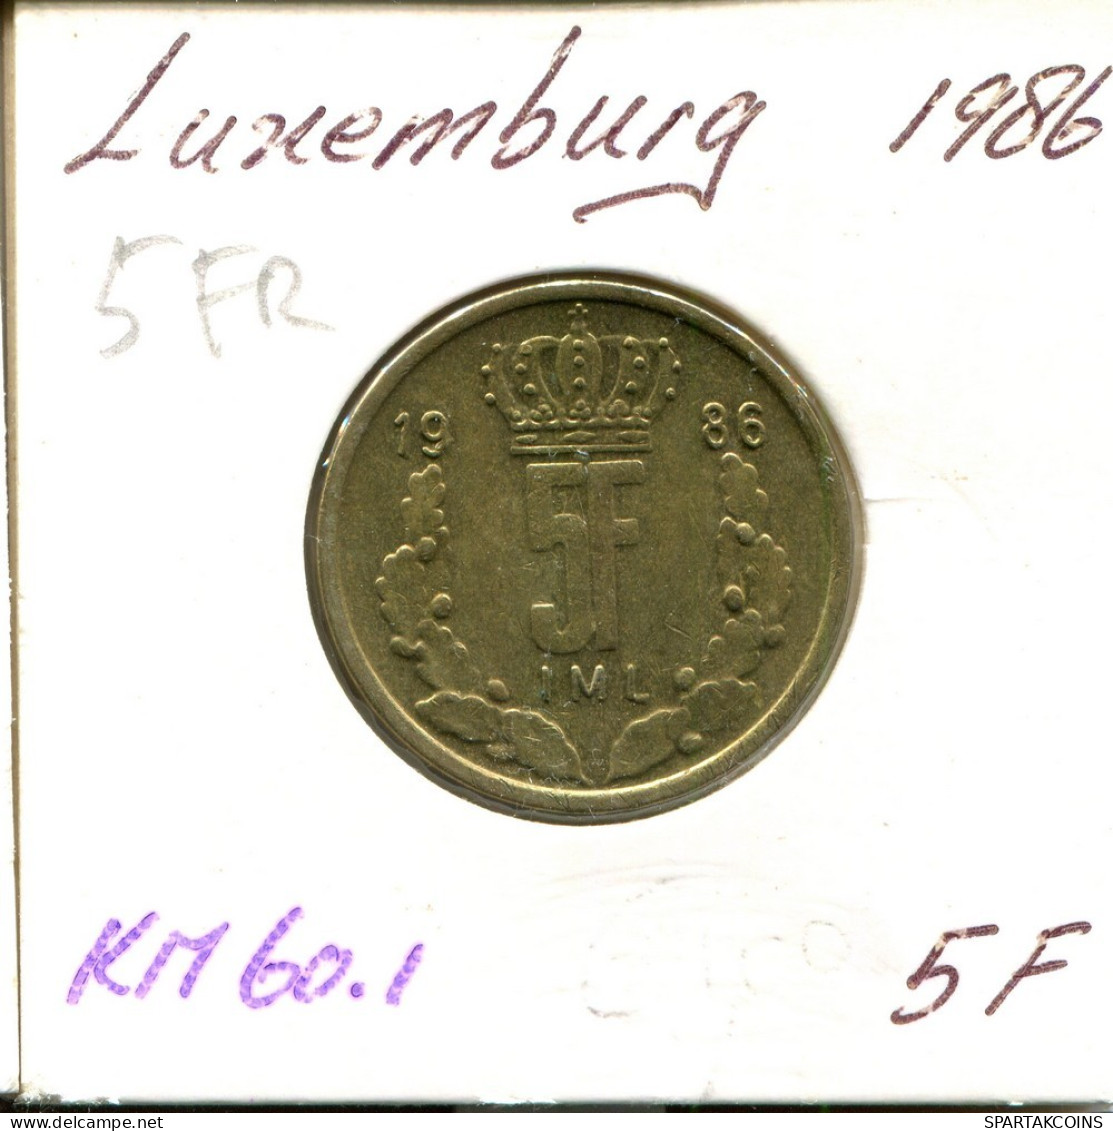 5 FRANCS 1986 LUXEMBURG LUXEMBOURG Münze #AT233.D.A - Luxembourg